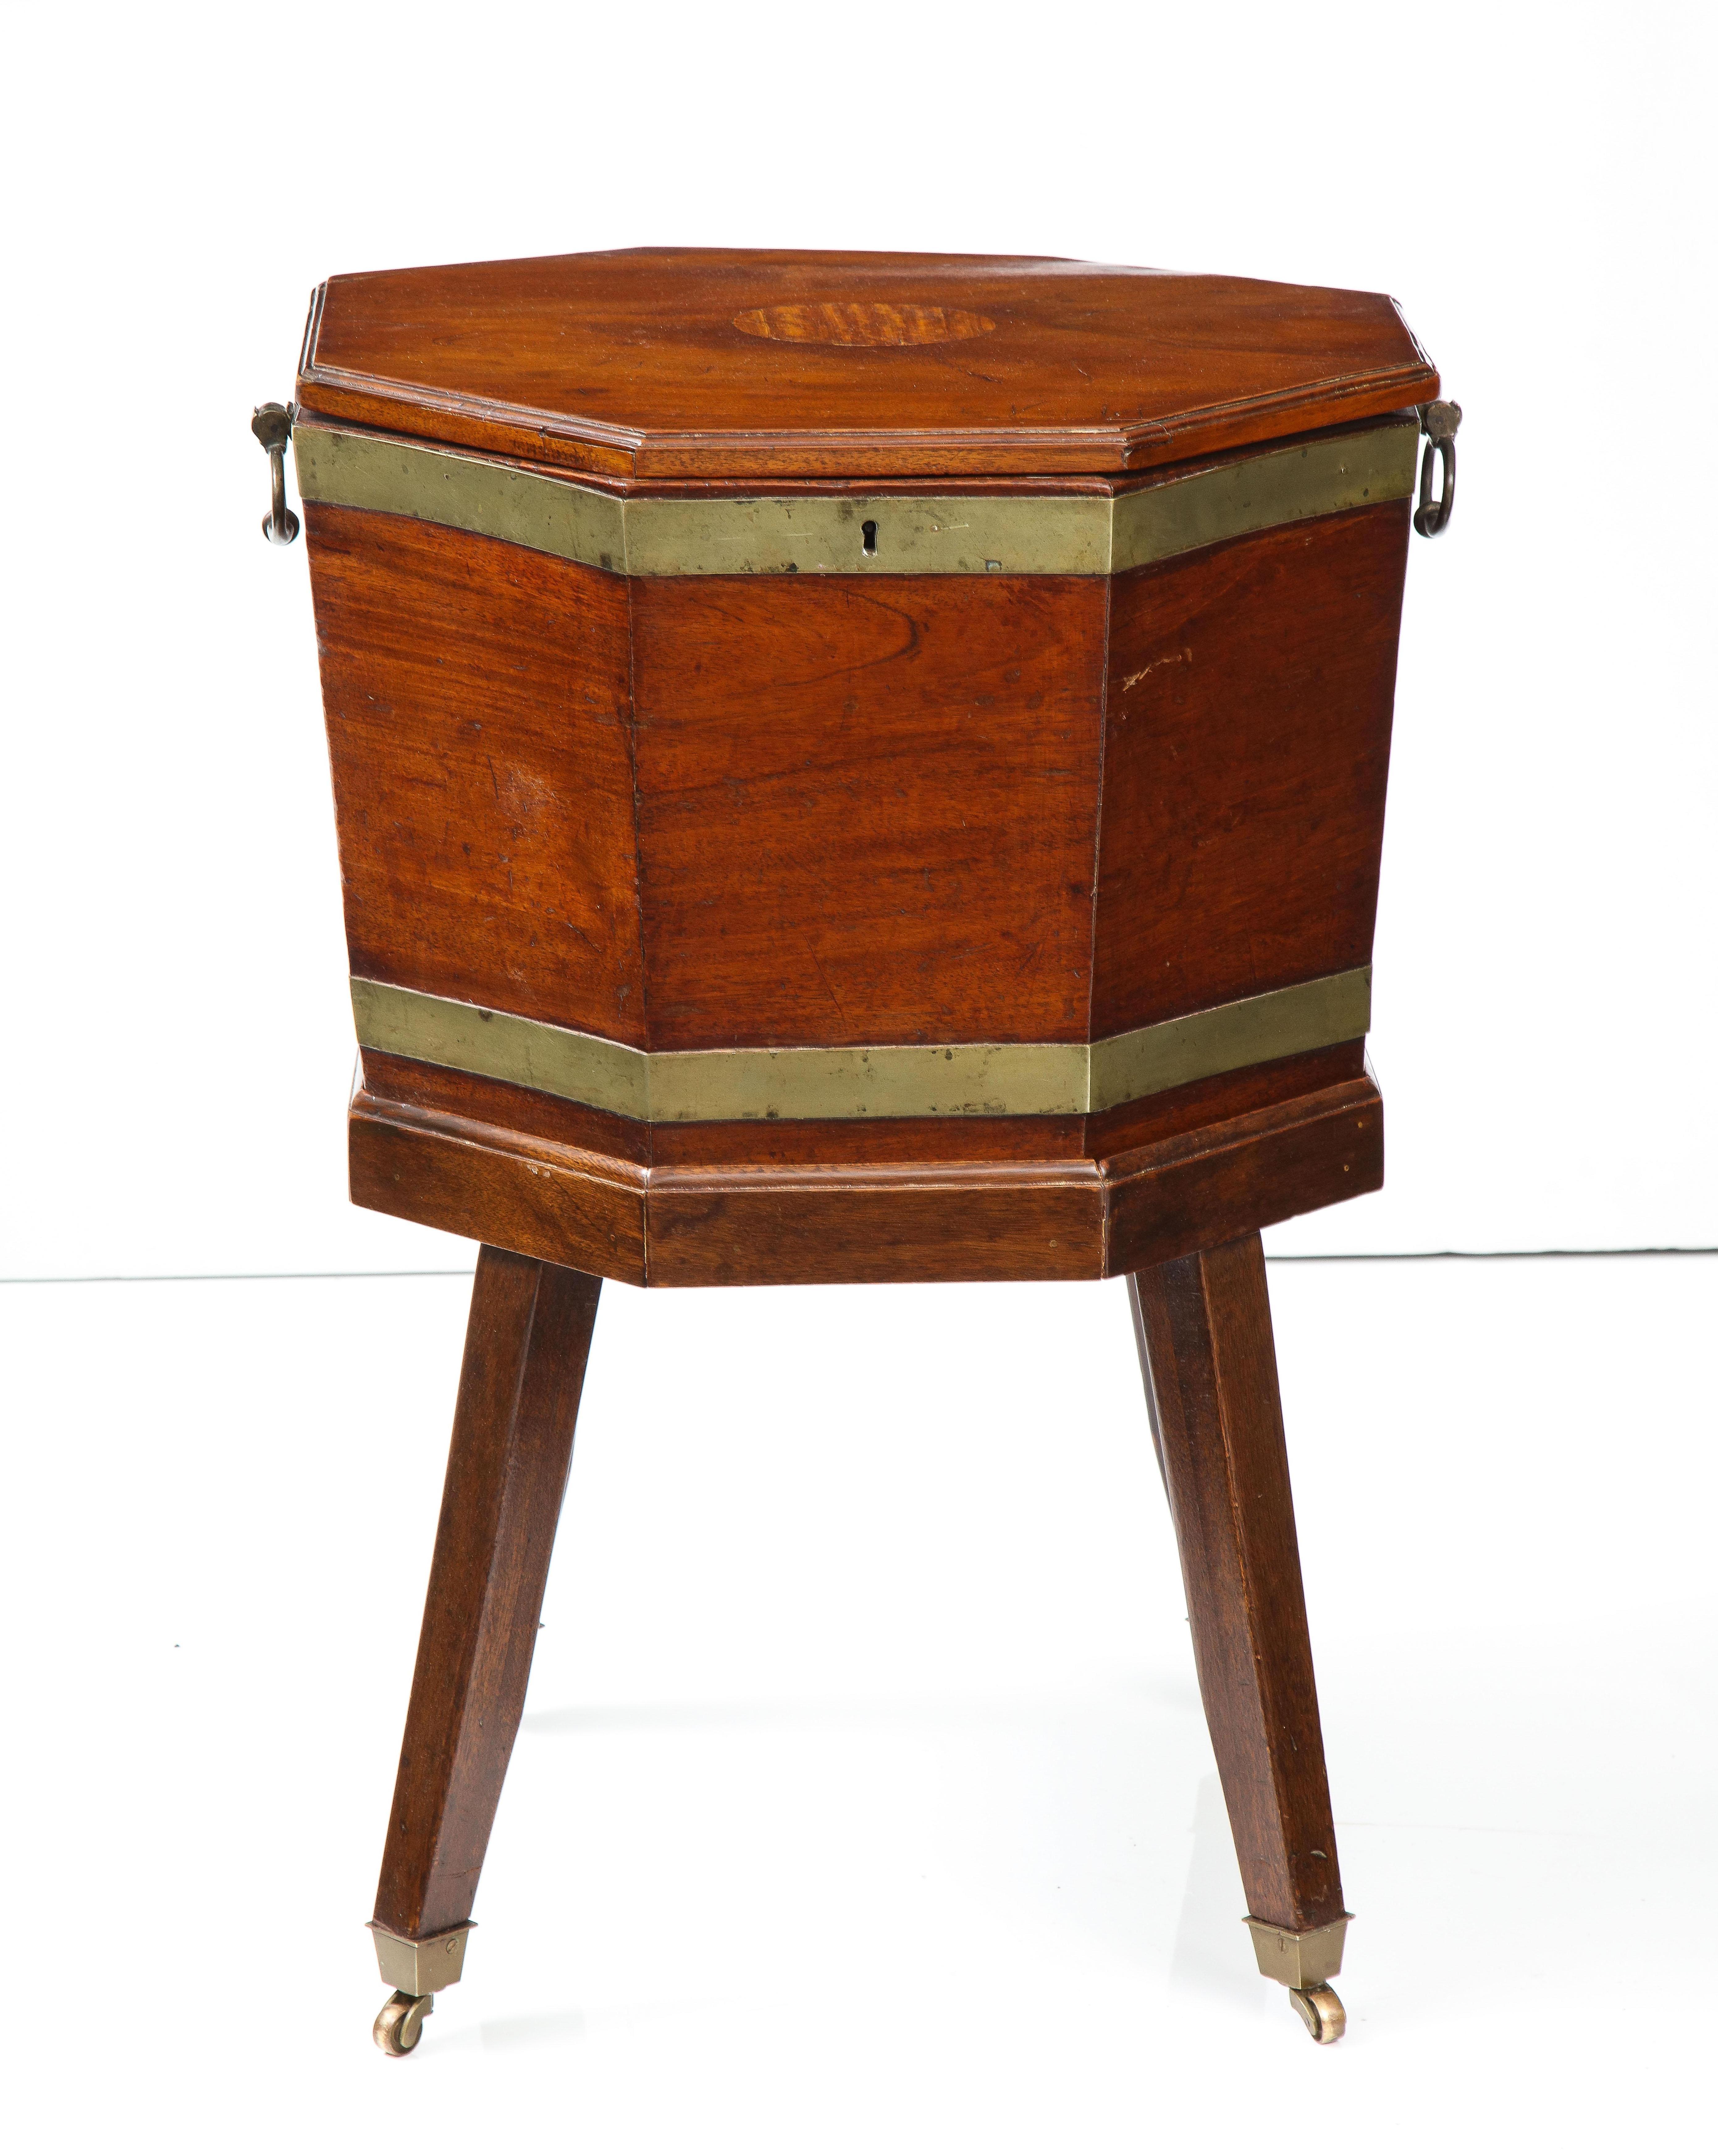 This handsome 19th-century mahogany cellarette is octagonal in shape and features beautiful brass banding, hardware and casters. Originally used to store wine and other libations, this piece can serve as storage or as a side or end table.